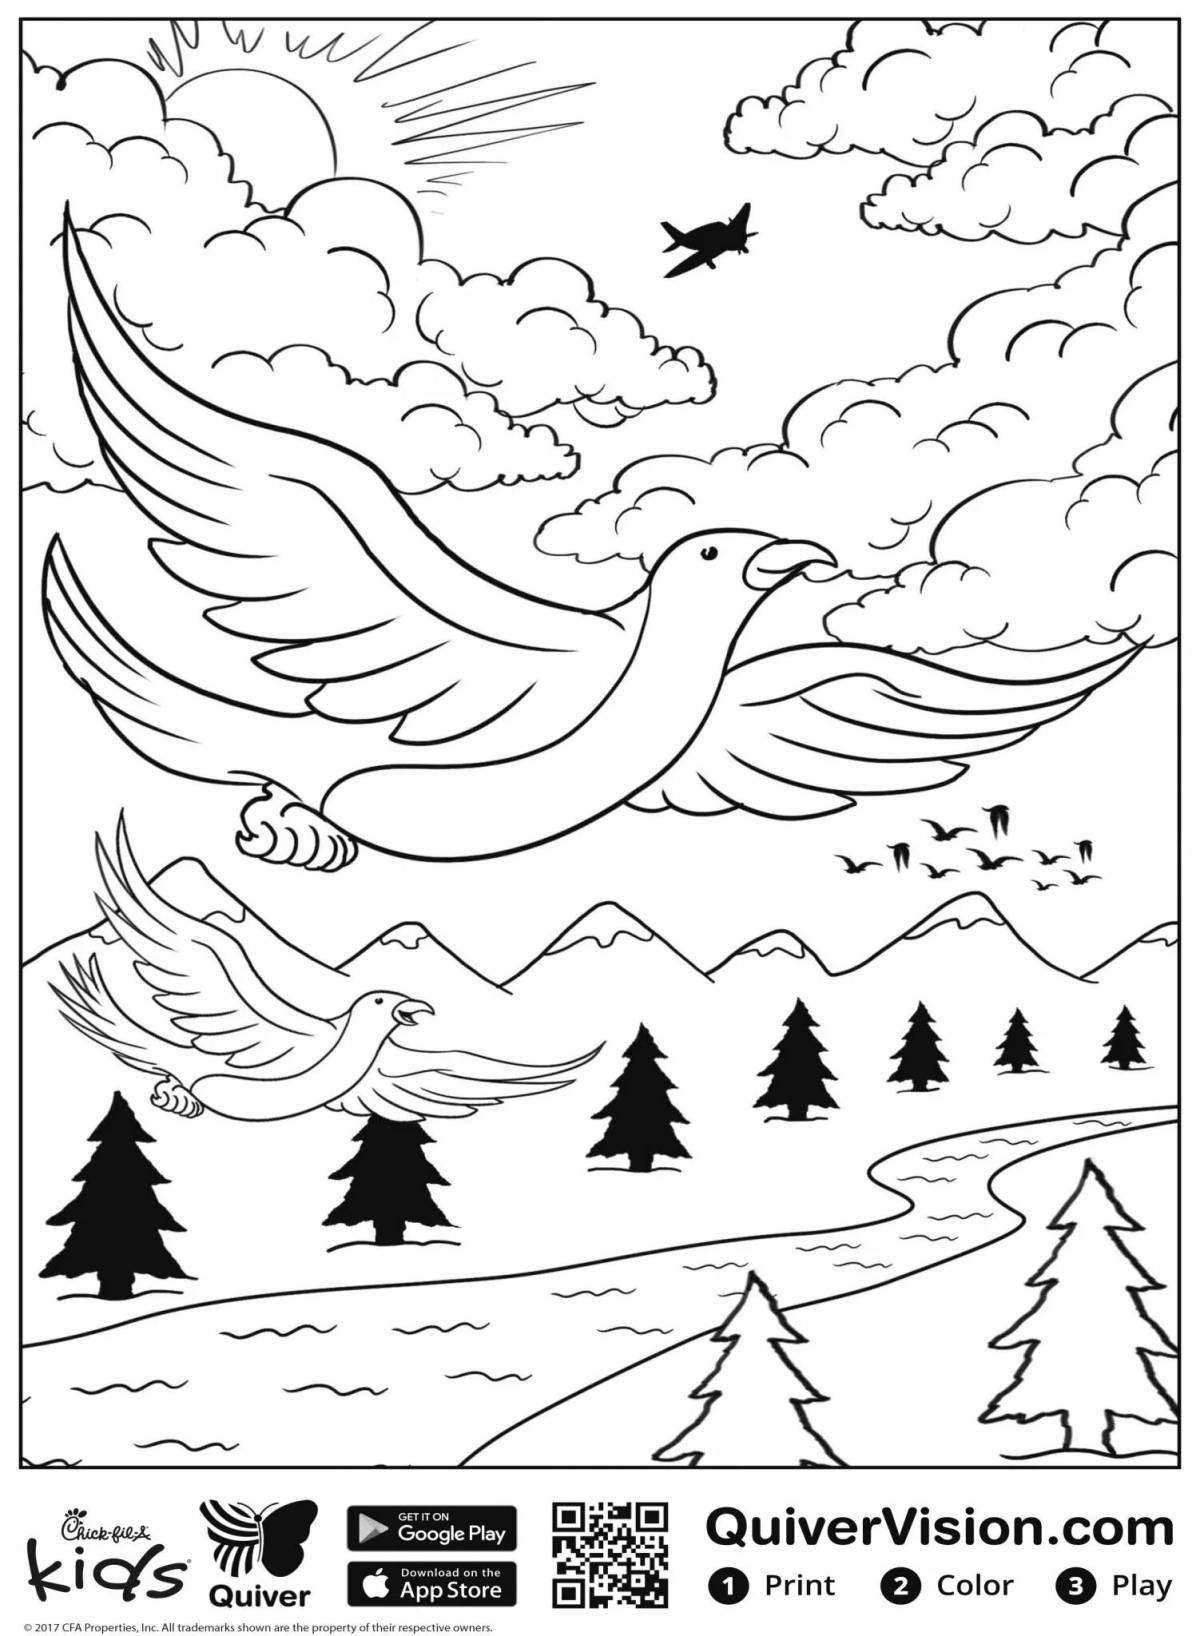 Amazing quivervision coloring page